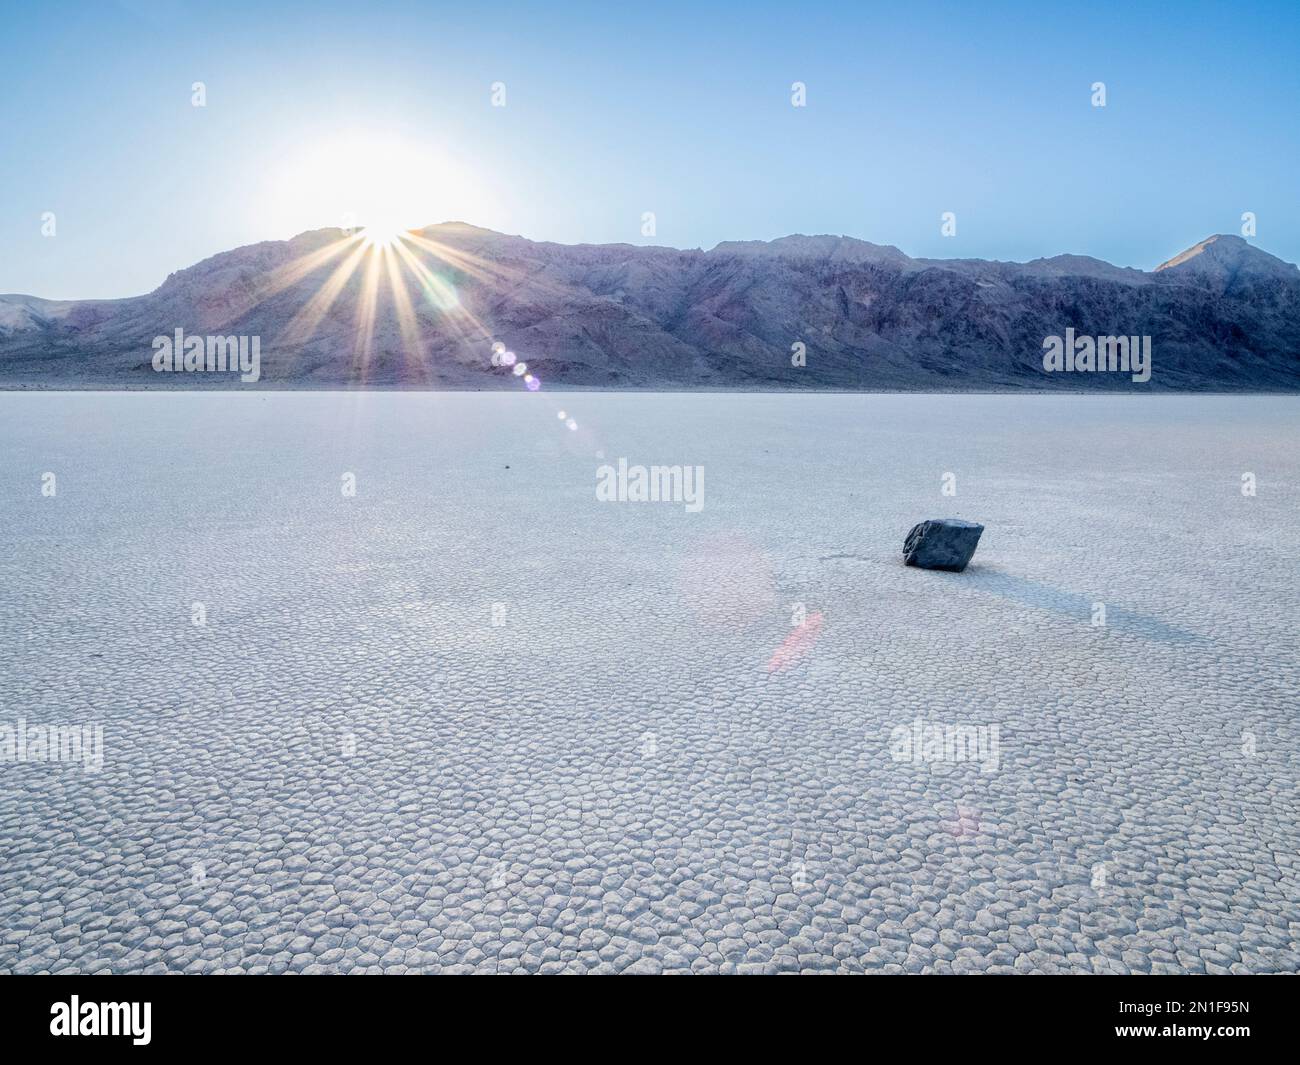 A moving rock at the Racetrack, a playa or dried up lakebed, in Death Valley National Park, California, United States of America, North America Stock Photo